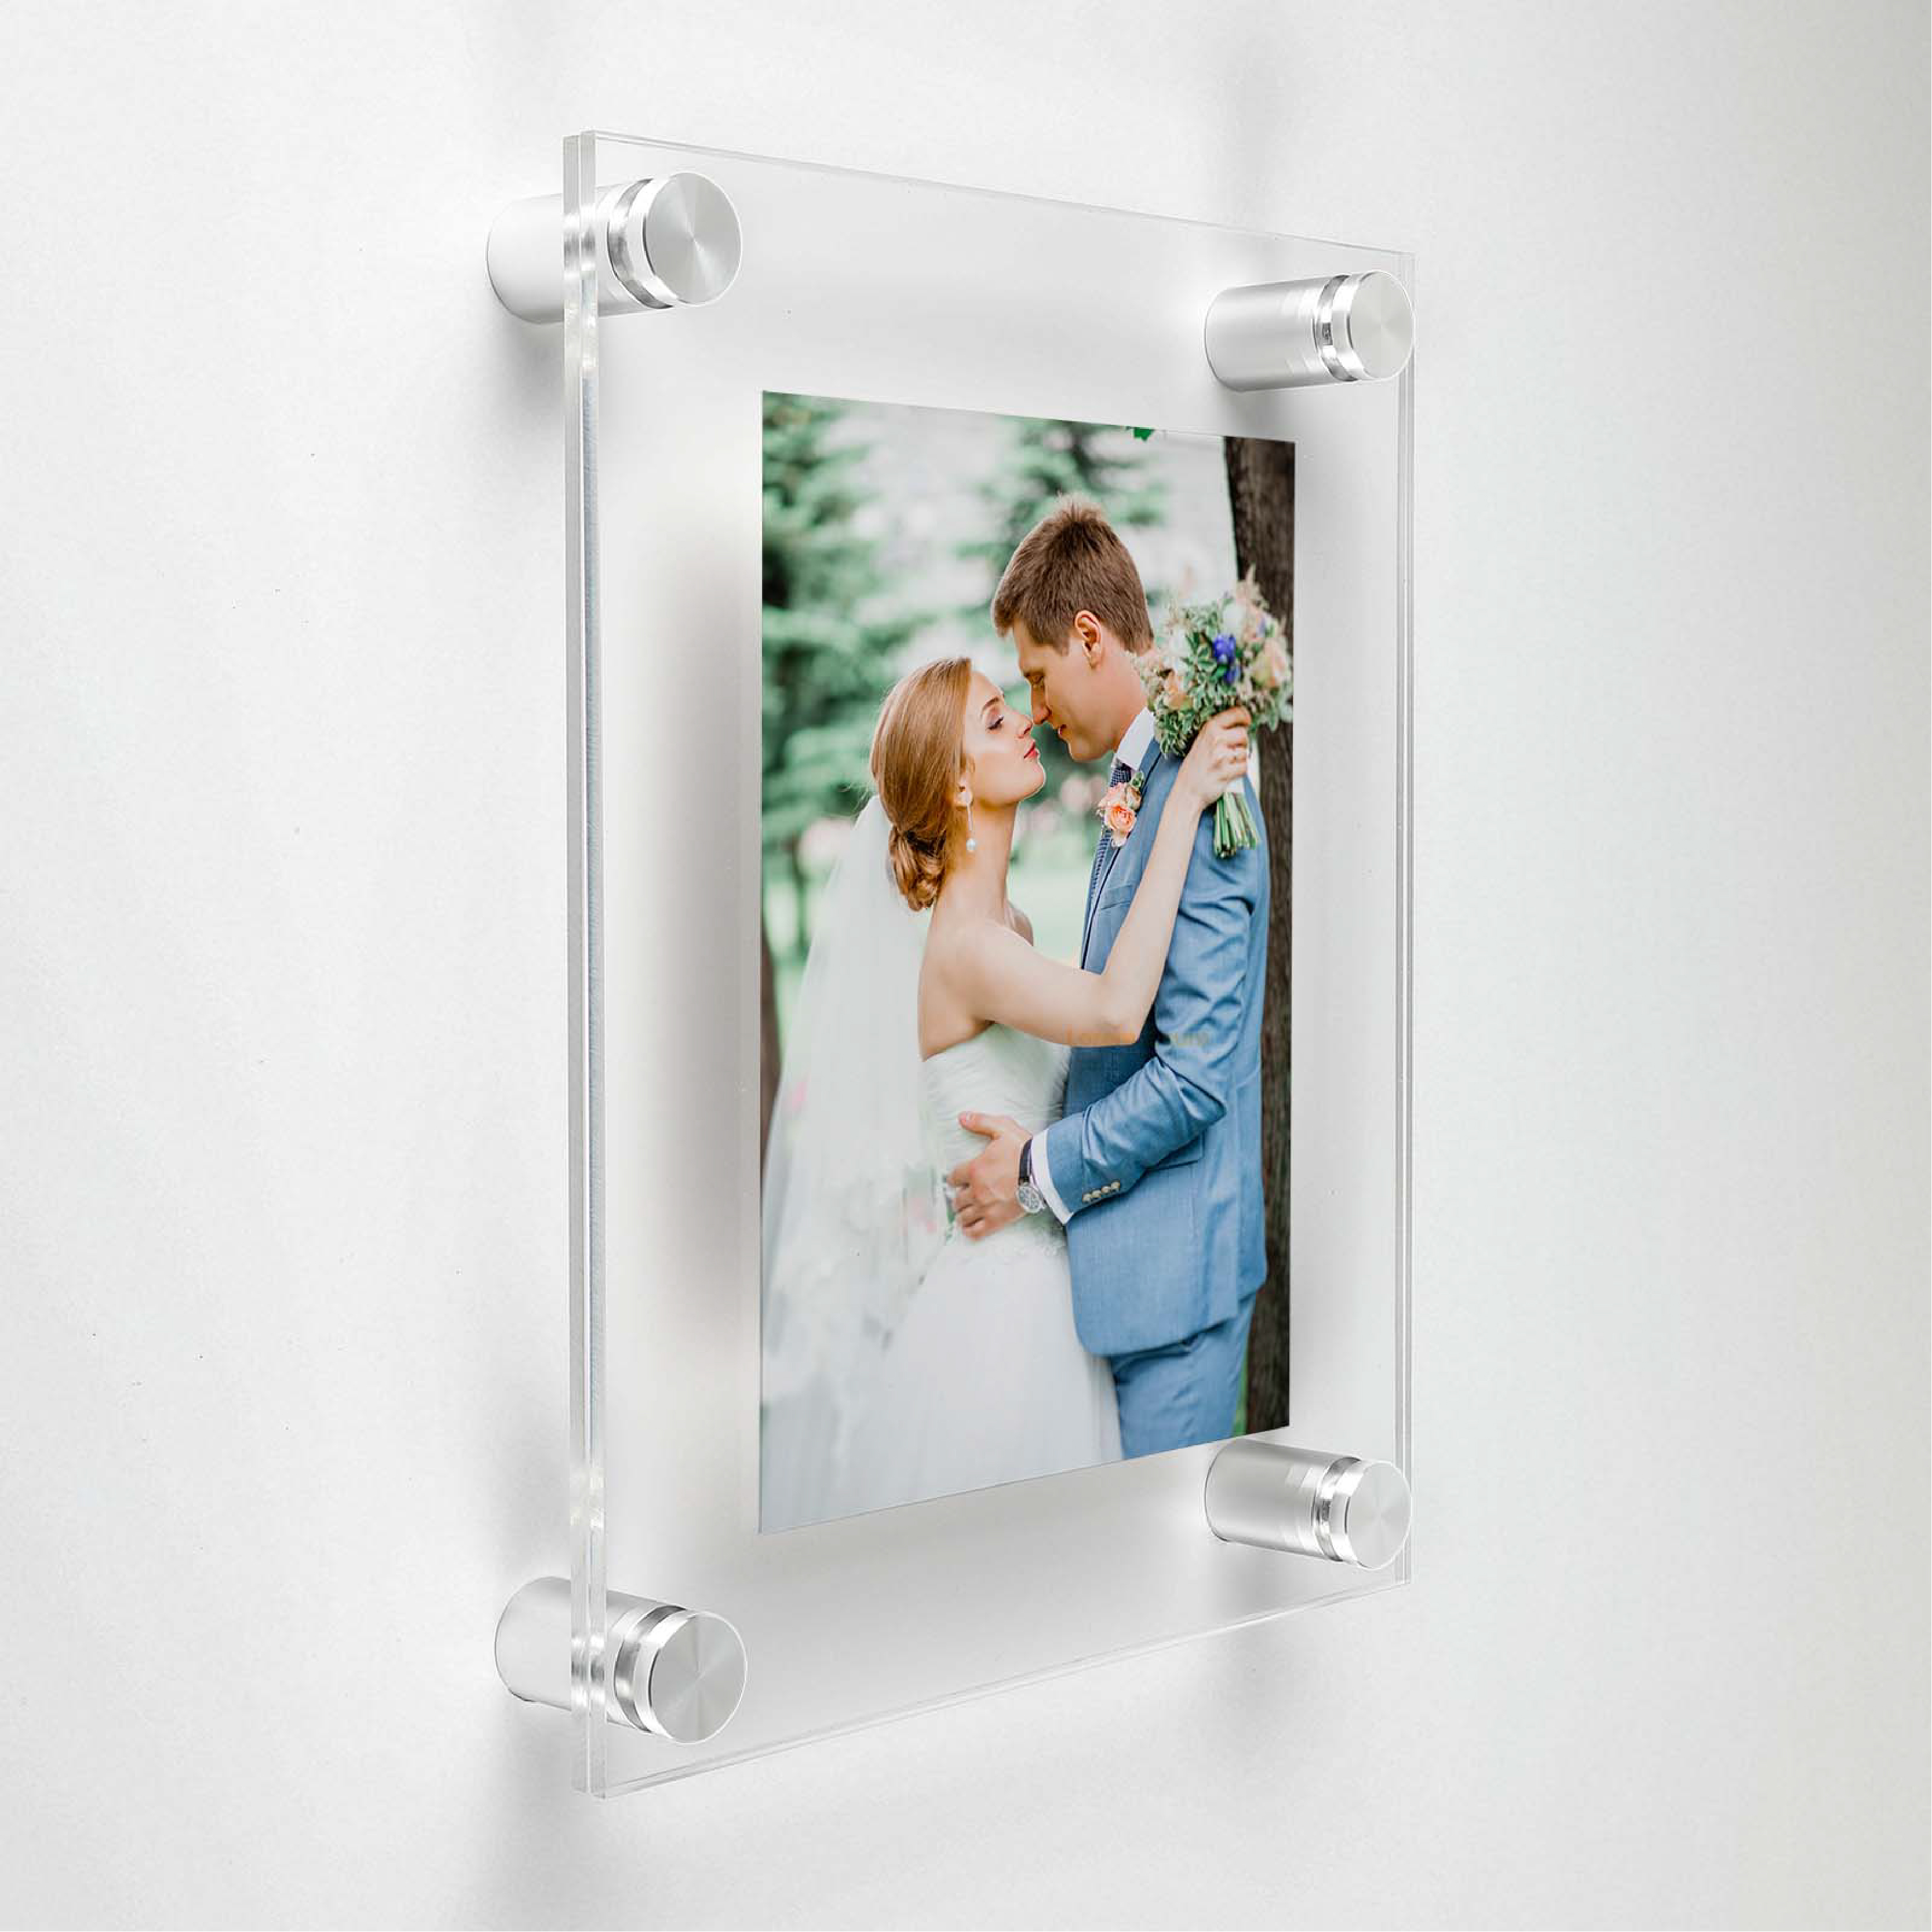 (2) 13-1/2'' x 19-1/2'' Clear Acrylics , Pre-Drilled With Polished Edges (Thick 3/16'' each), Wall Frame with (4) 3/4'' x 1'' Silver Anodized Aluminum Standoffs includes Screws and Anchors